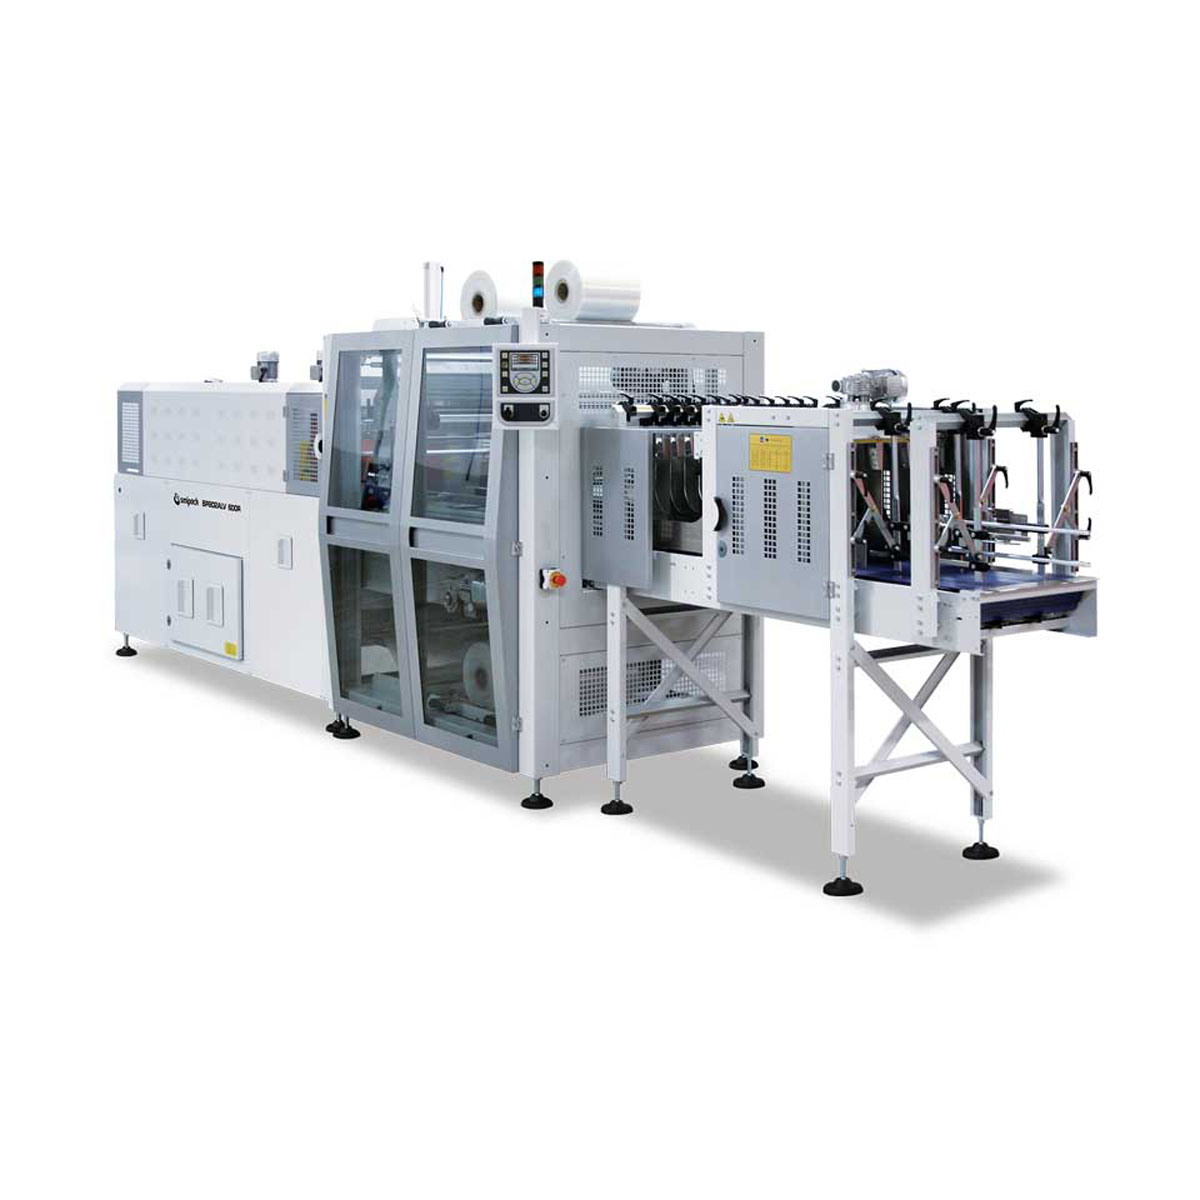 Bundle Wrapping Machine to Sort and Collate